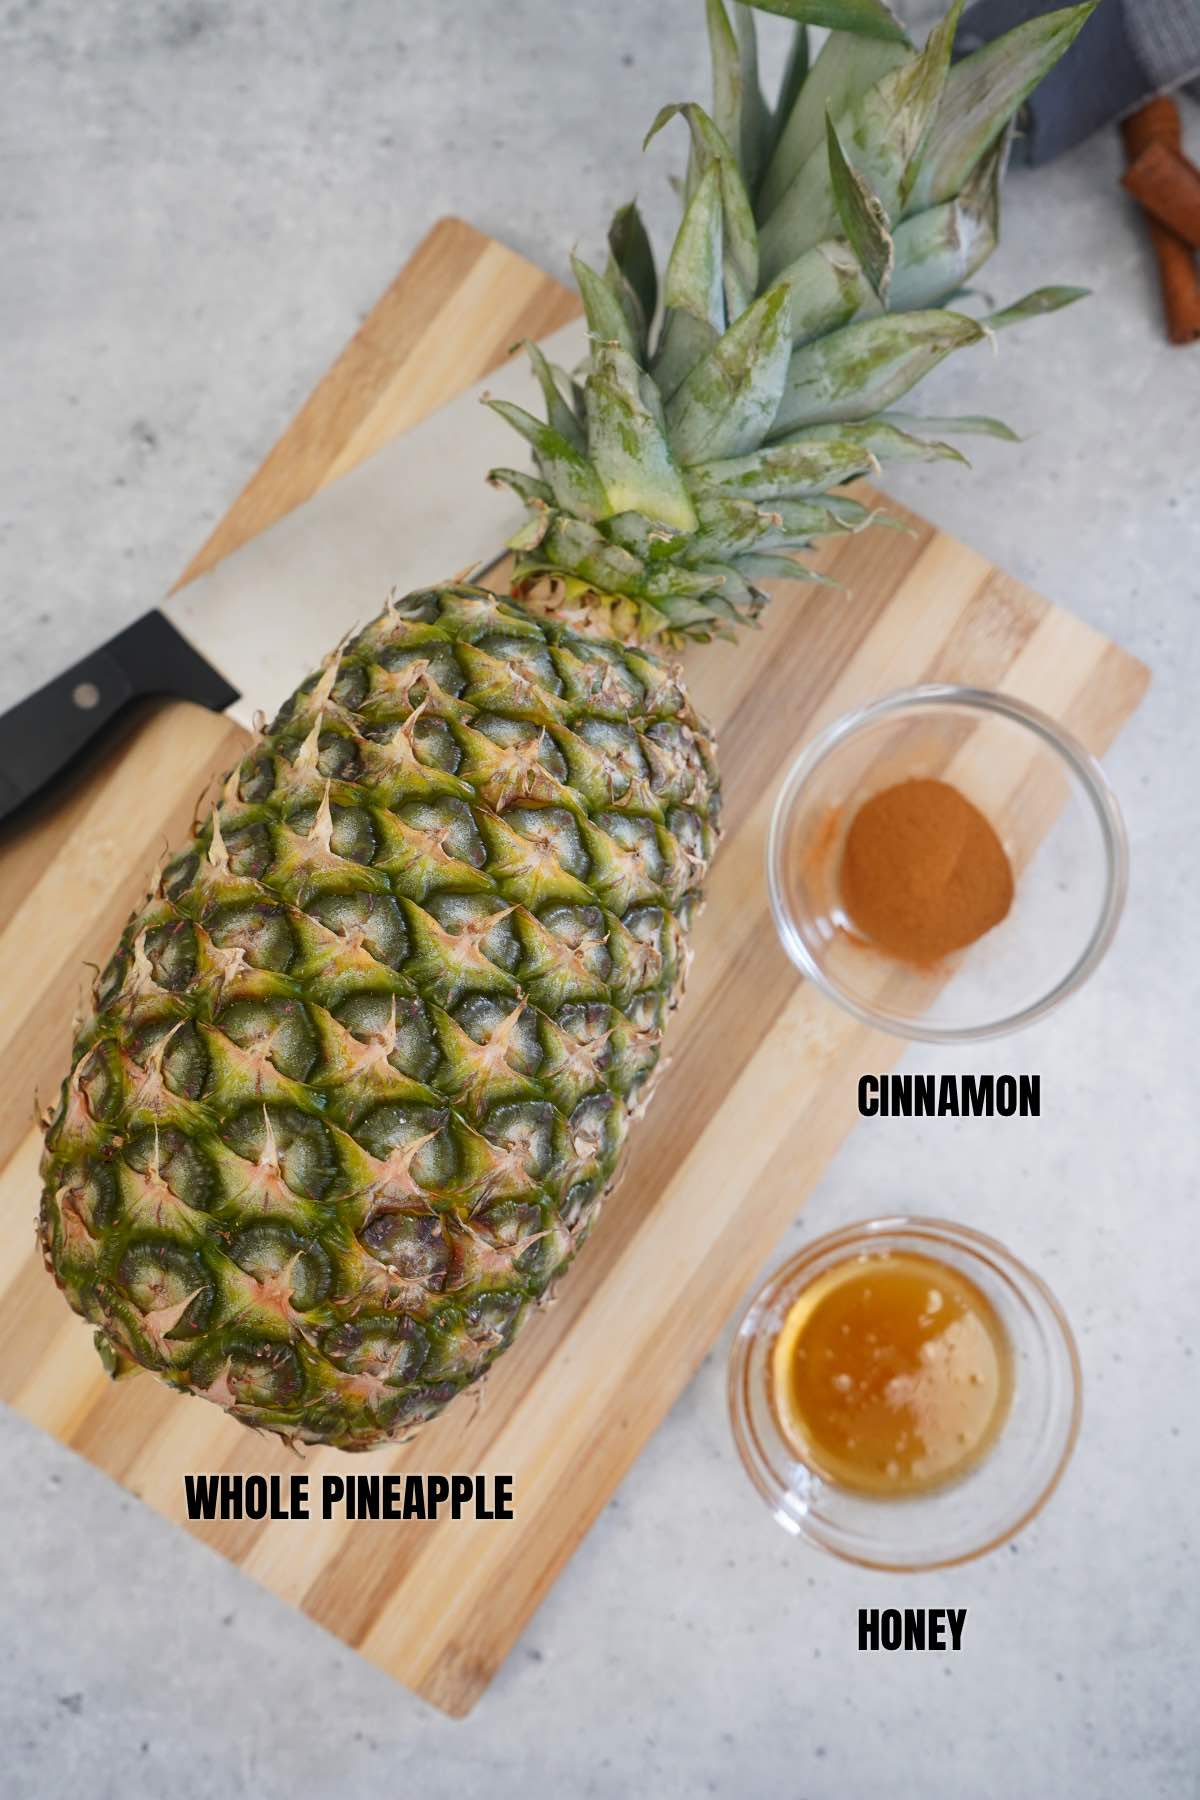 Labeled Ingredients for Smoked Pineapple.